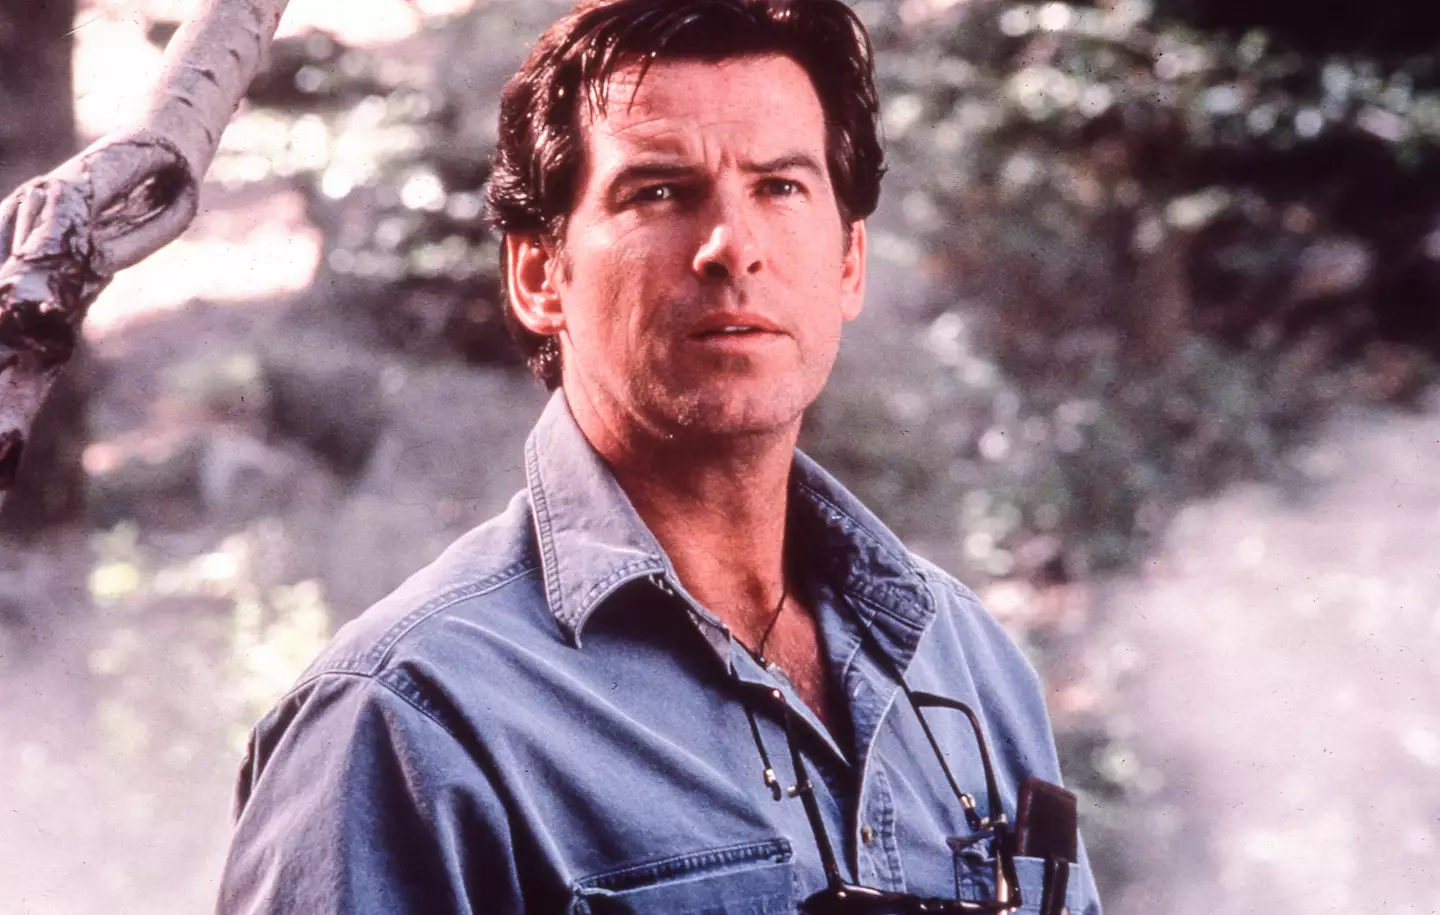 Pierce Brosnan said that playing a superhero was the 'last thing on his mind'.